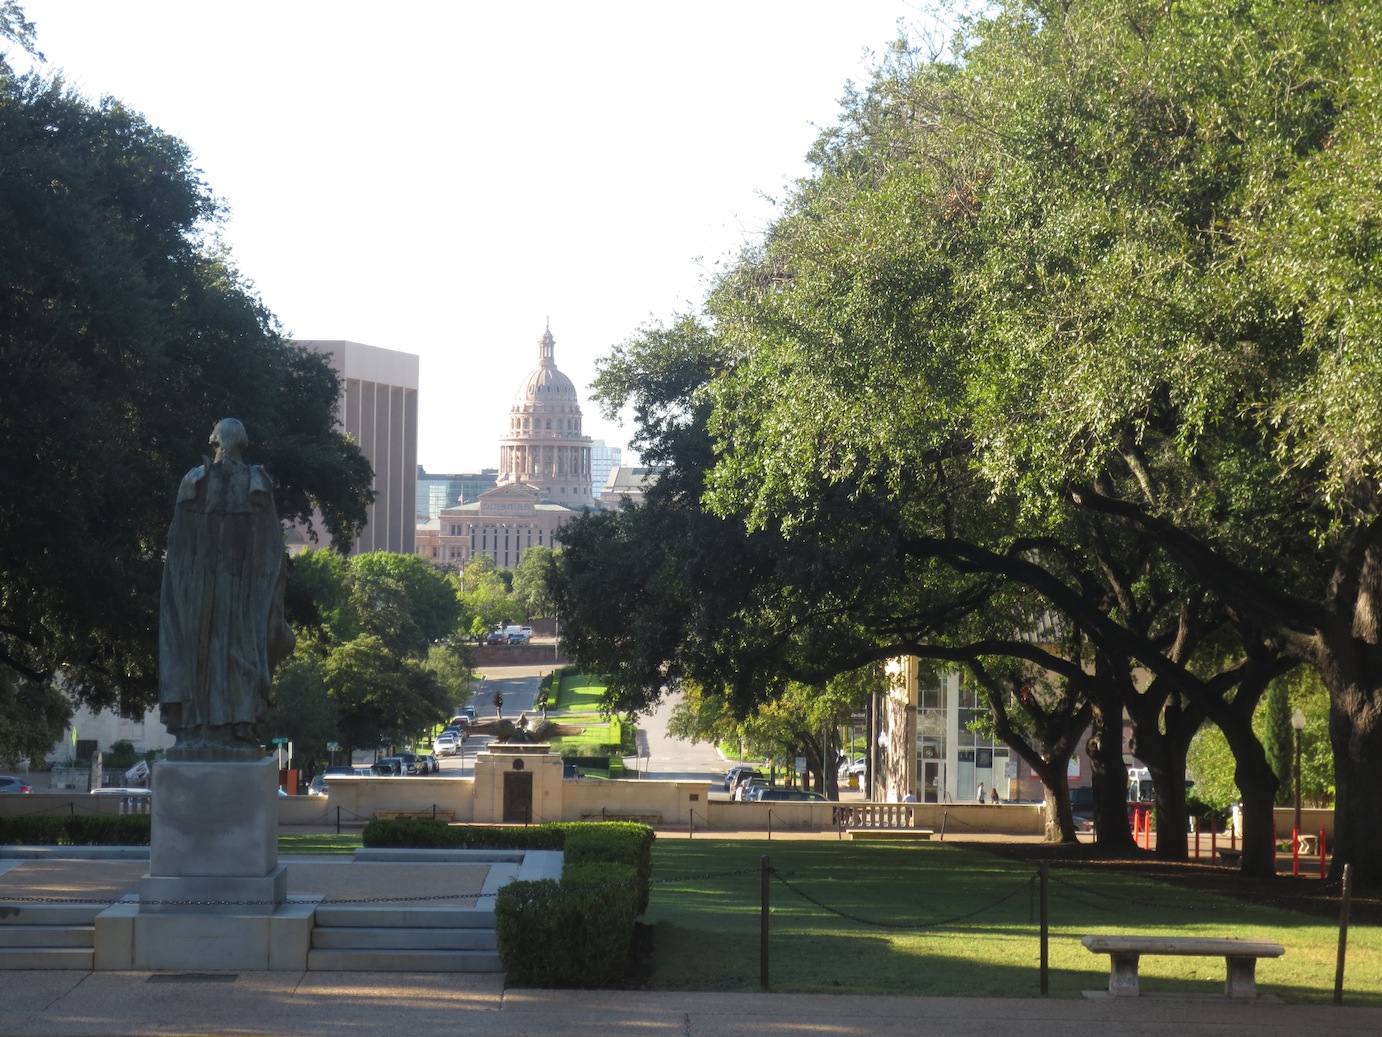 Statue of George Washington overlooking the Austin Capitol building.